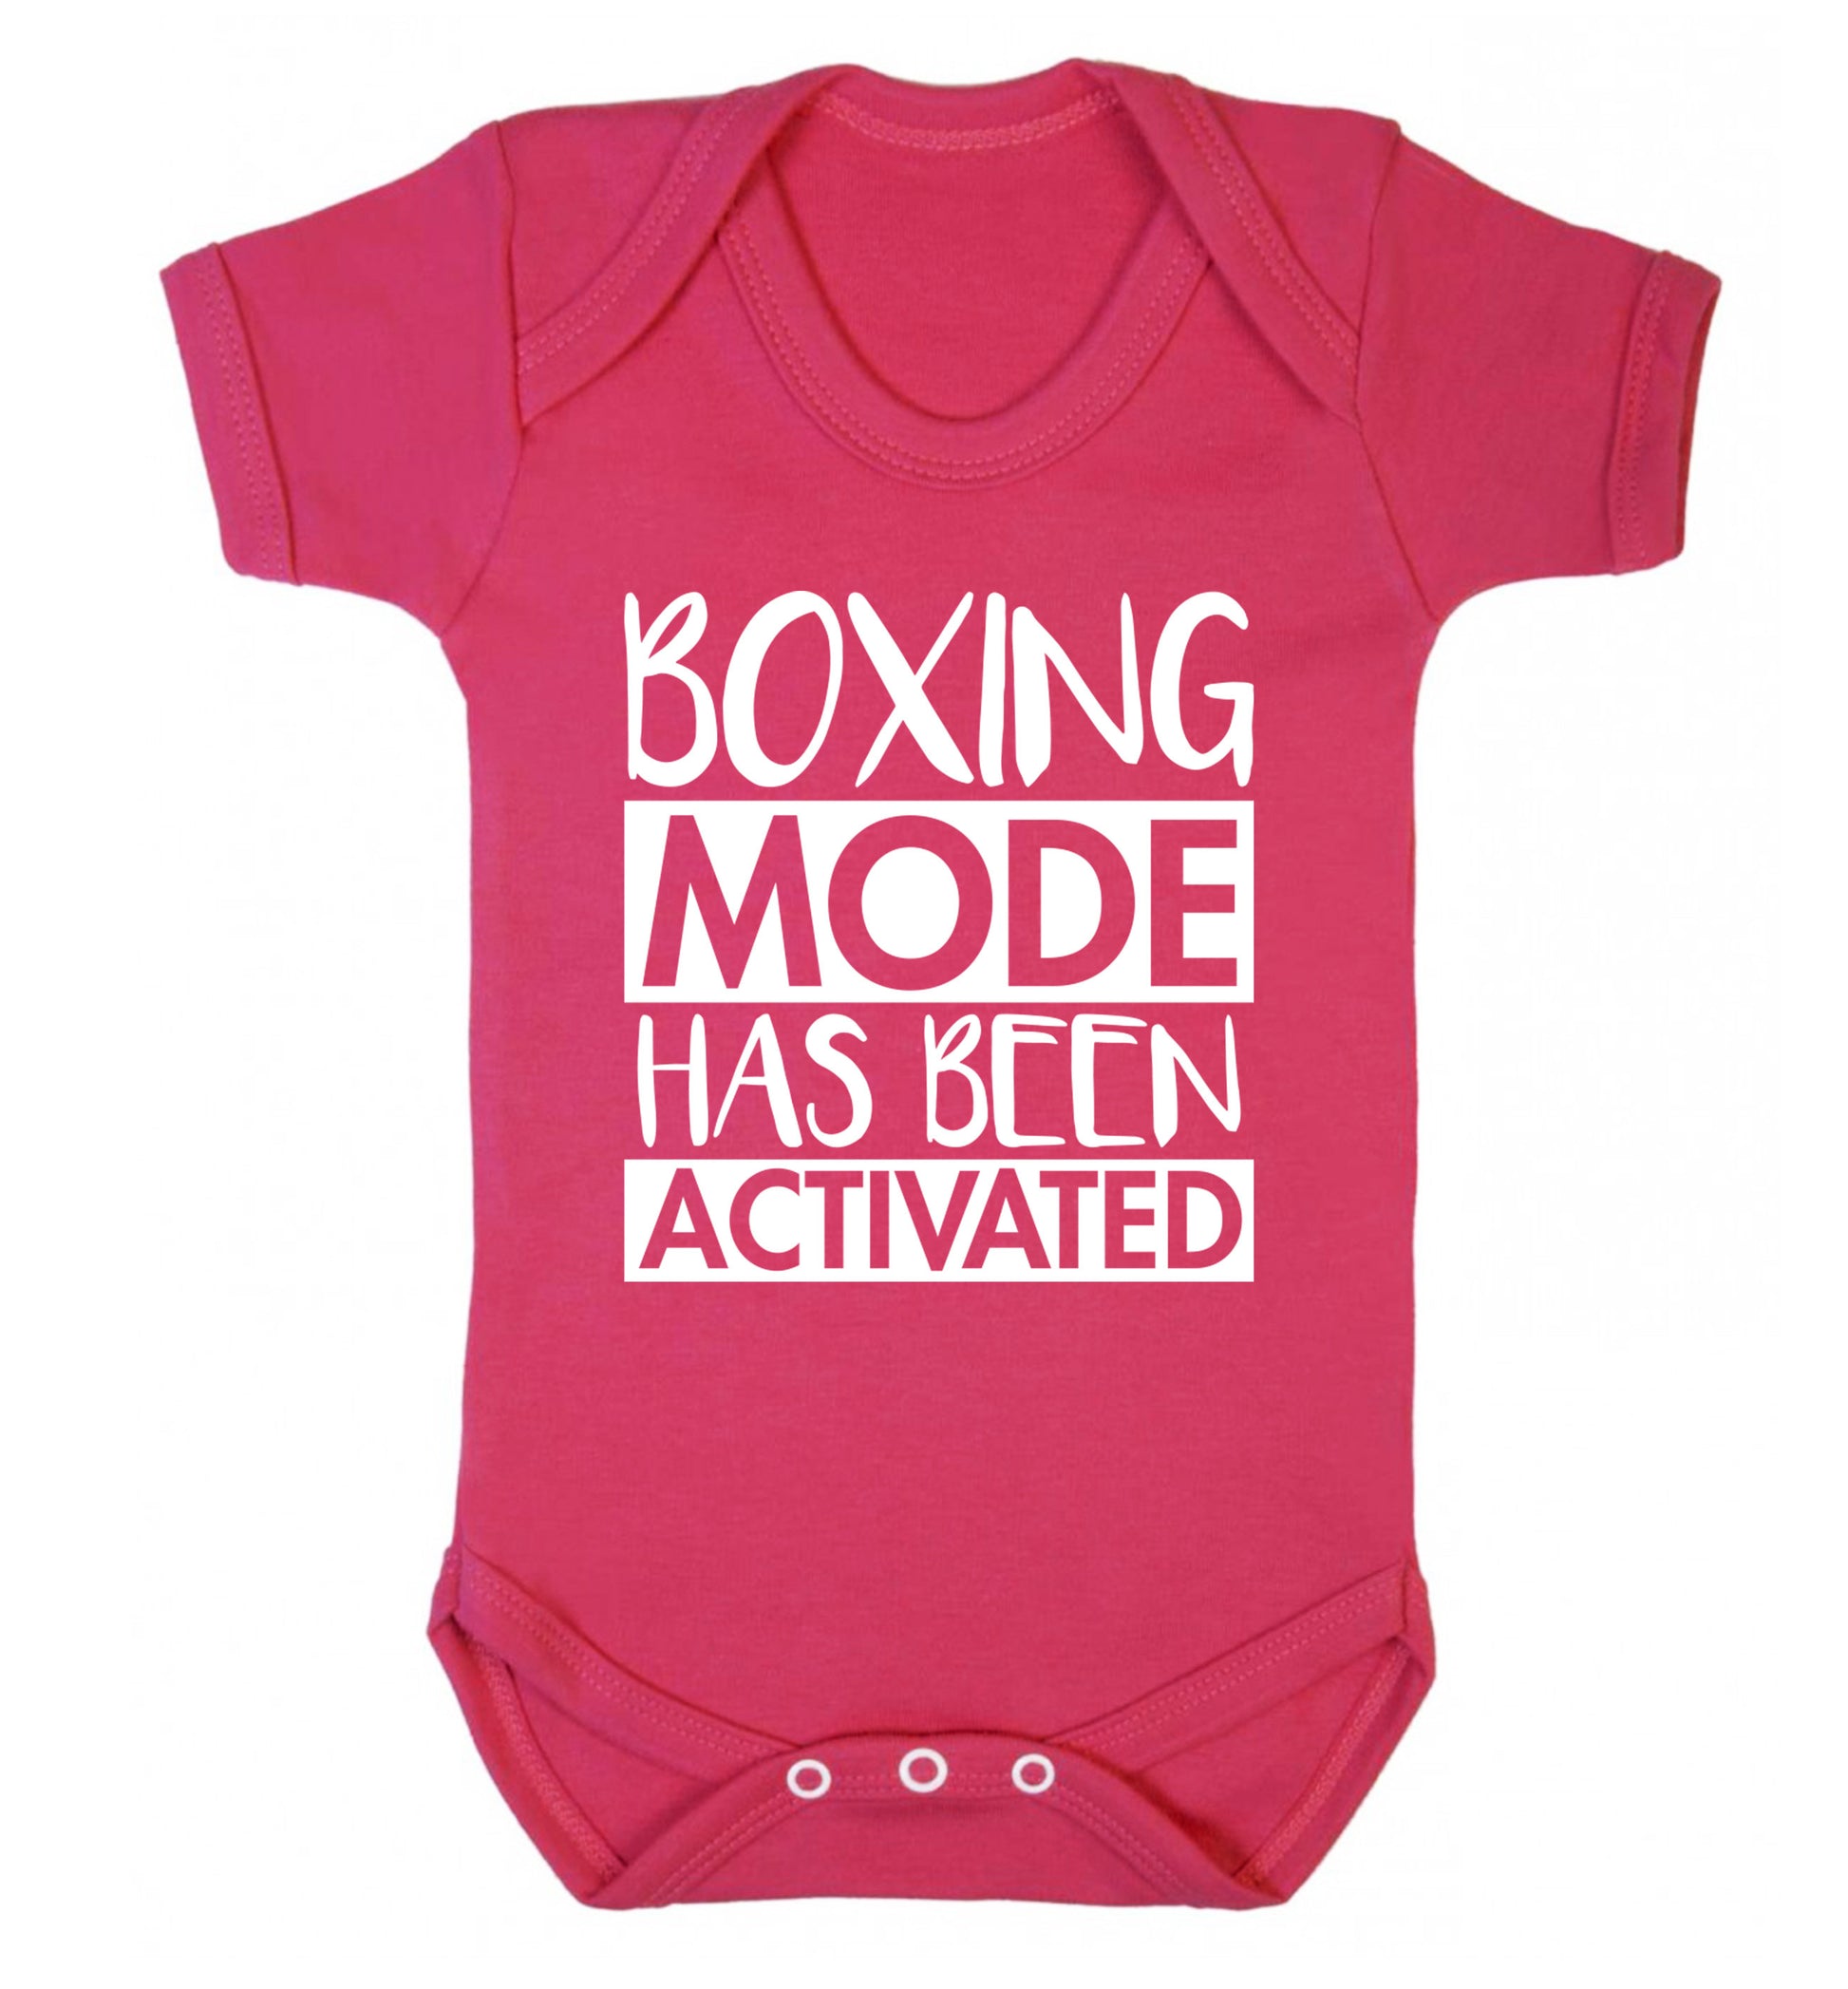 Boxing mode activated Baby Vest dark pink 18-24 months